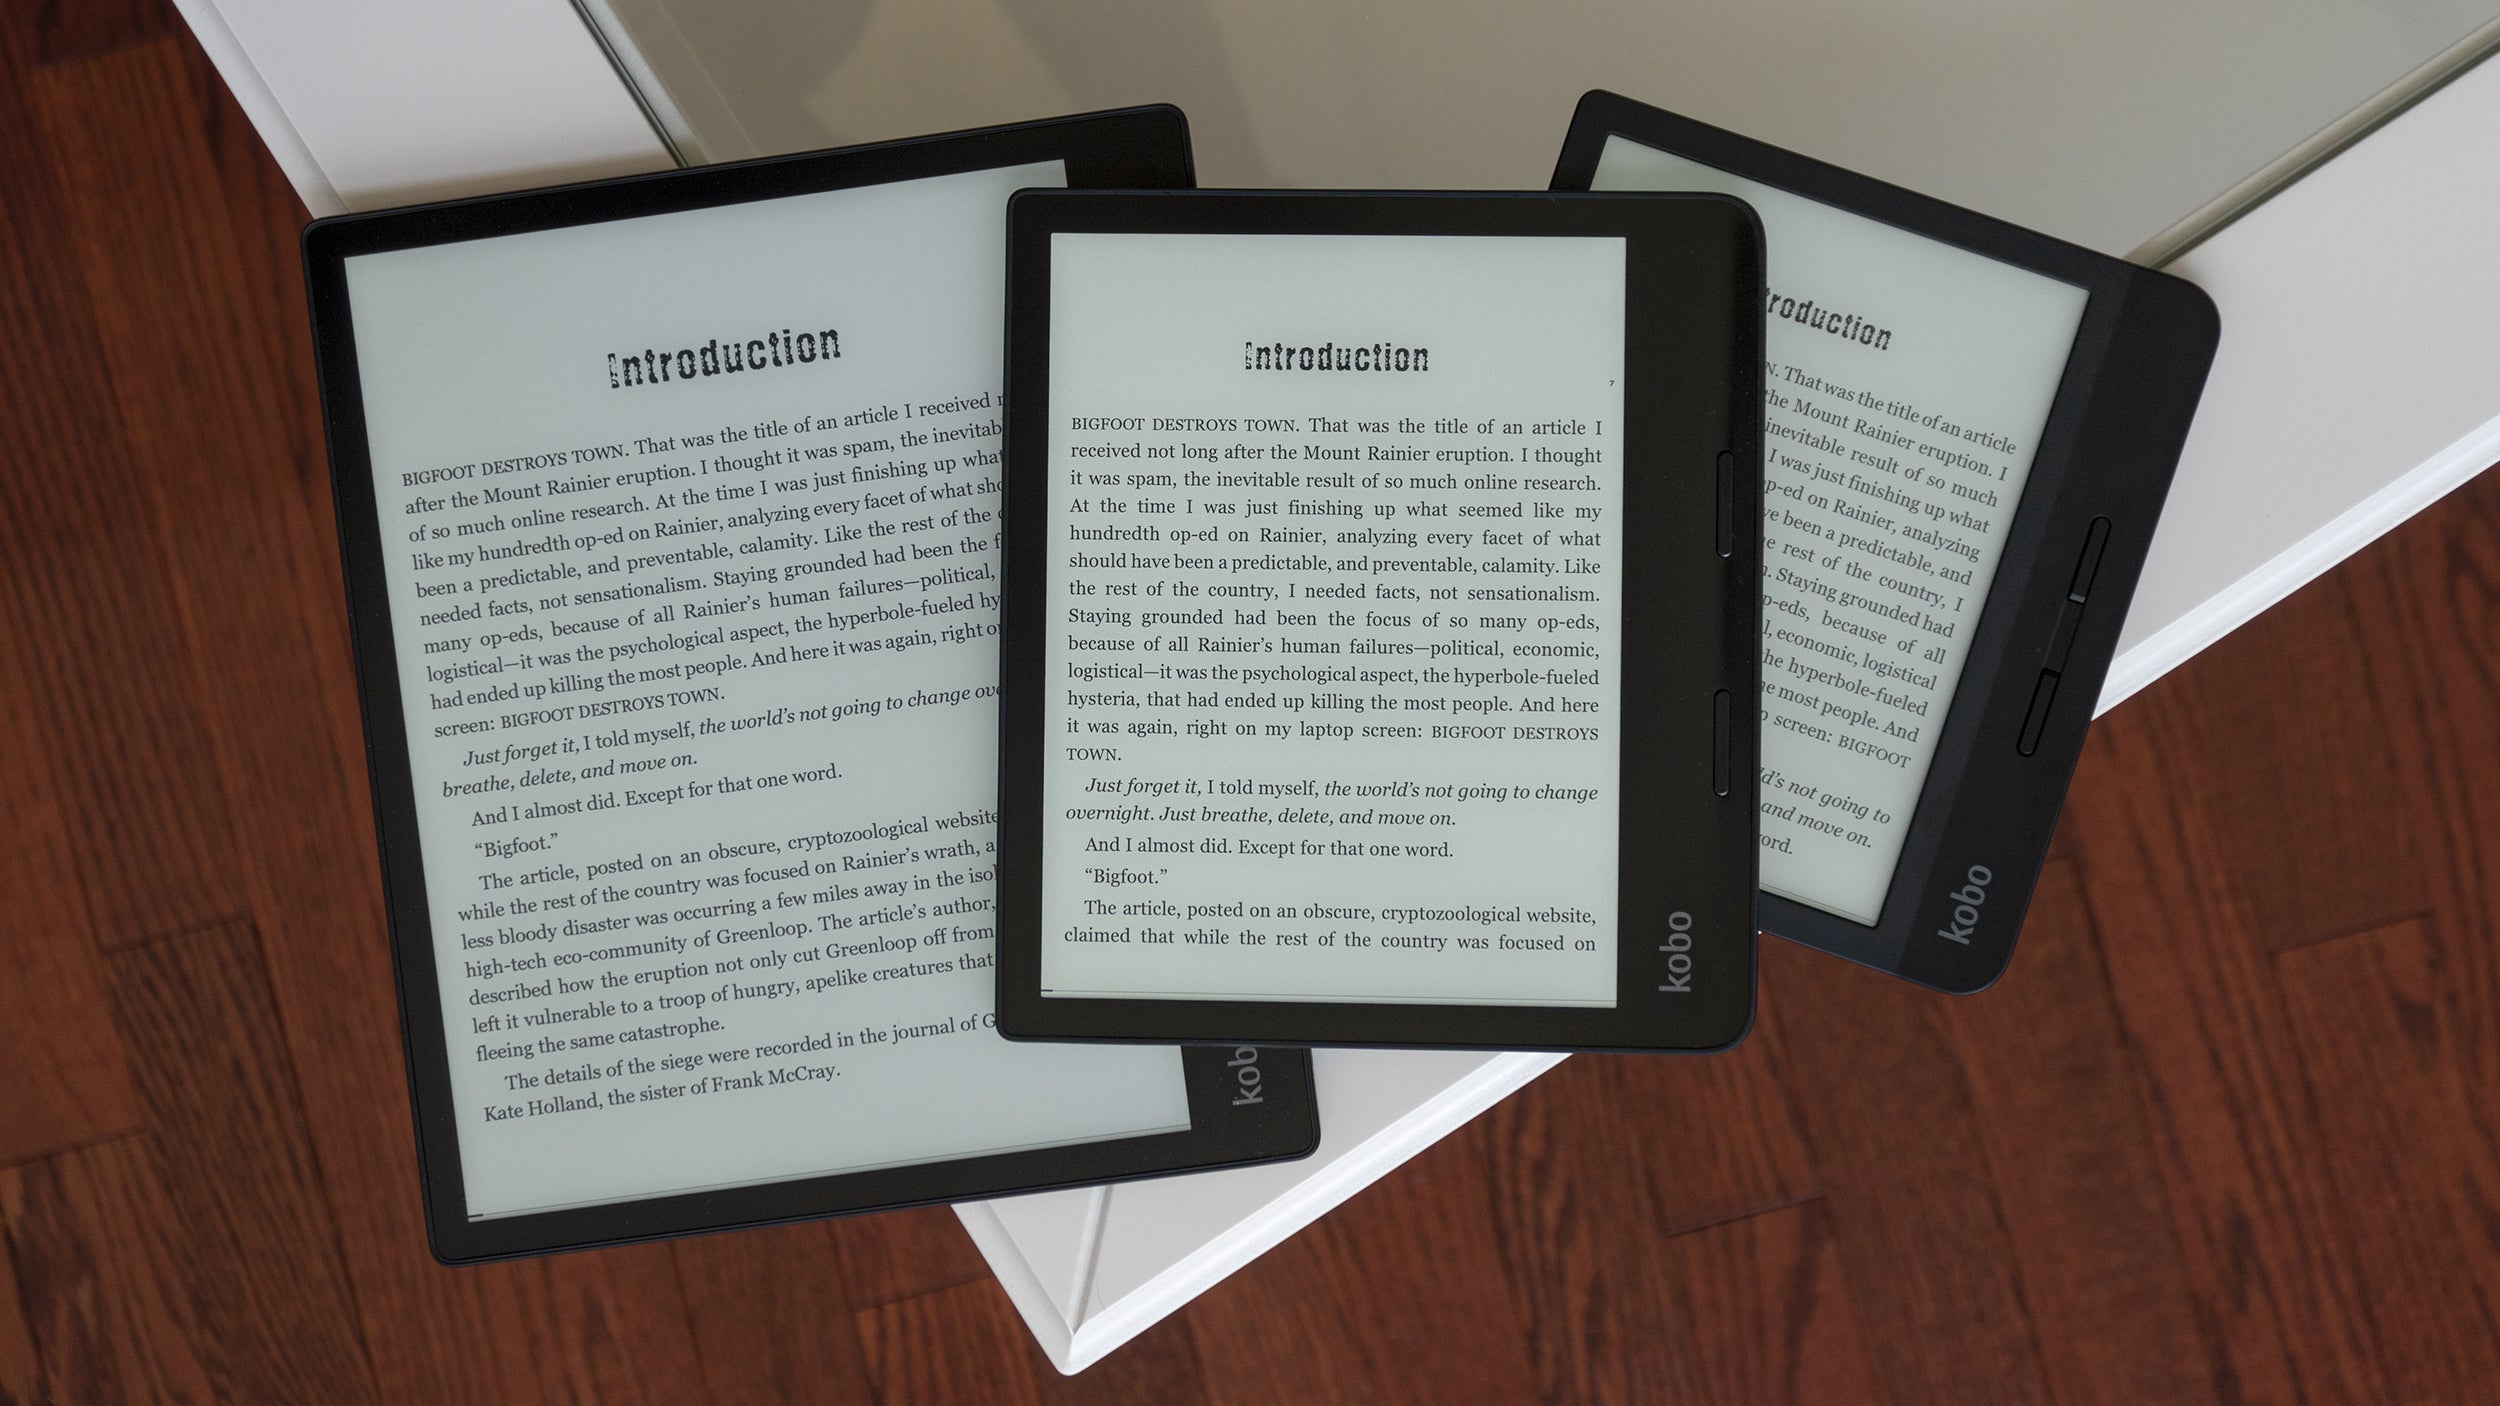 The 8-inch Kobo Sage (centre) is smaller than the 10.3-inch Kobo Elipsa (left) and slightly larger than the 7-inch Kobo Libra (right). (Photo: Andrew Liszewski - Gizmodo)